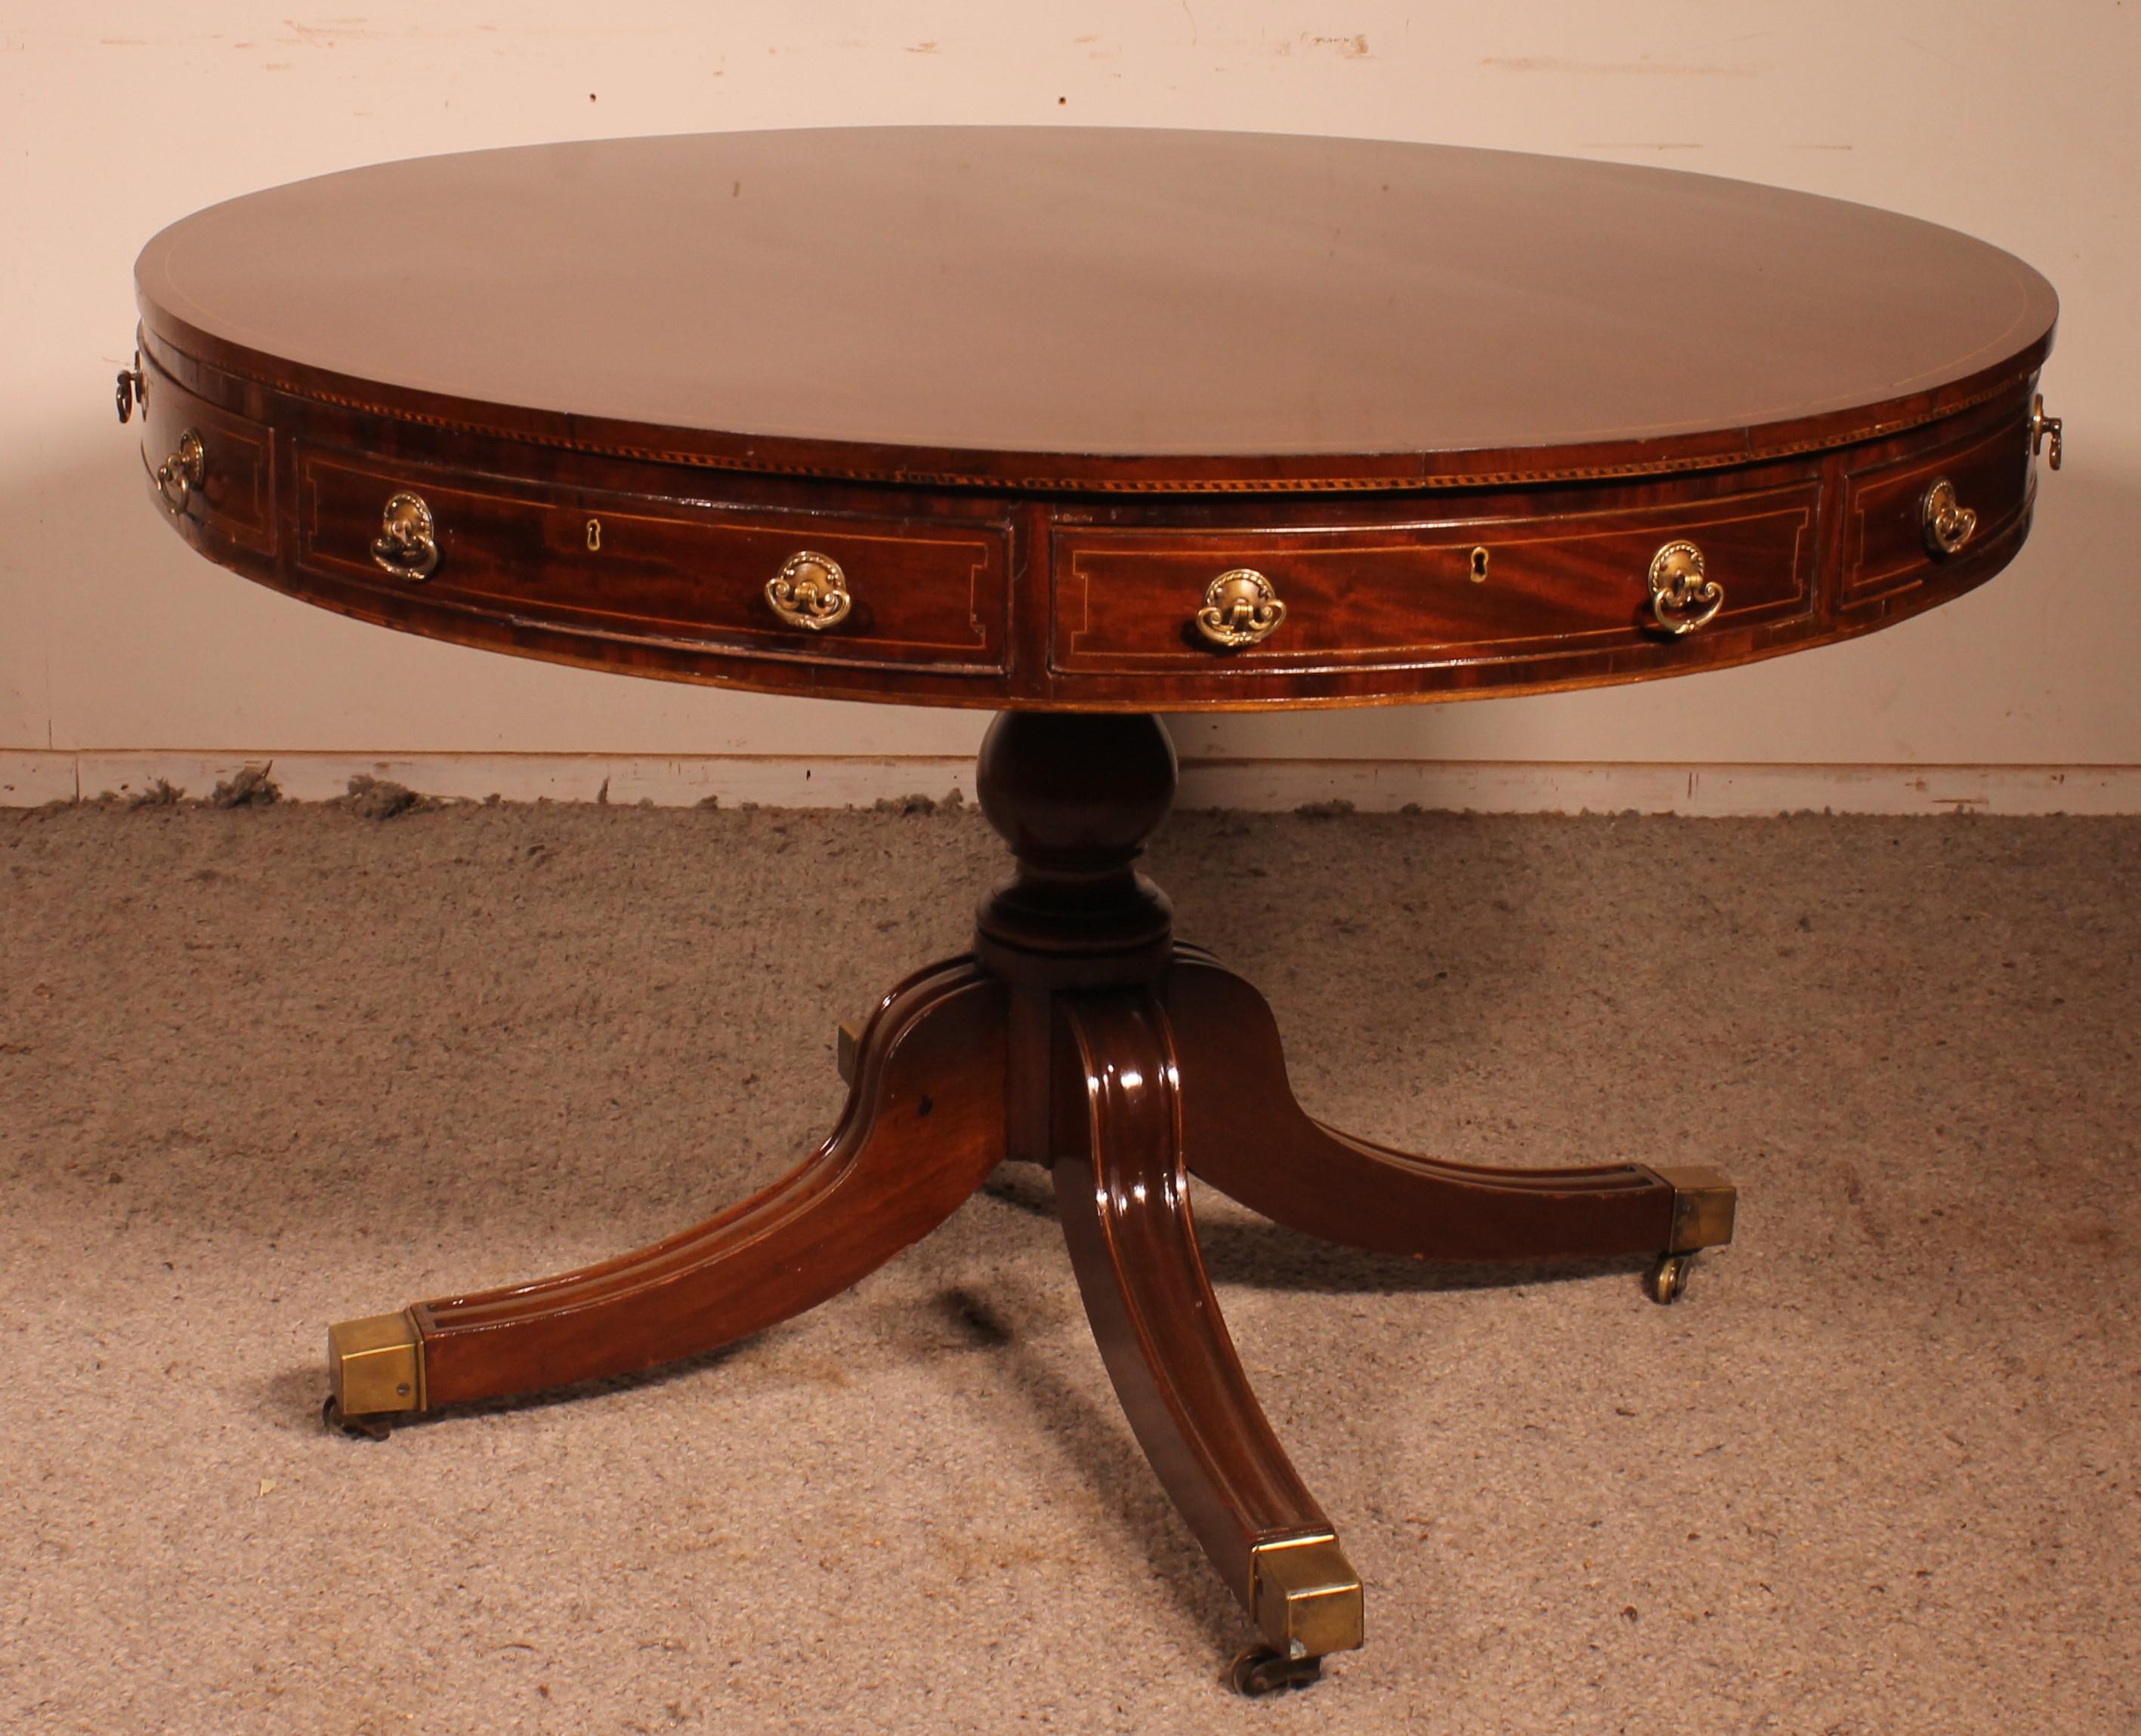 19th Century English Table Called Drum Table in Mahogany circa 1820, Regency Period